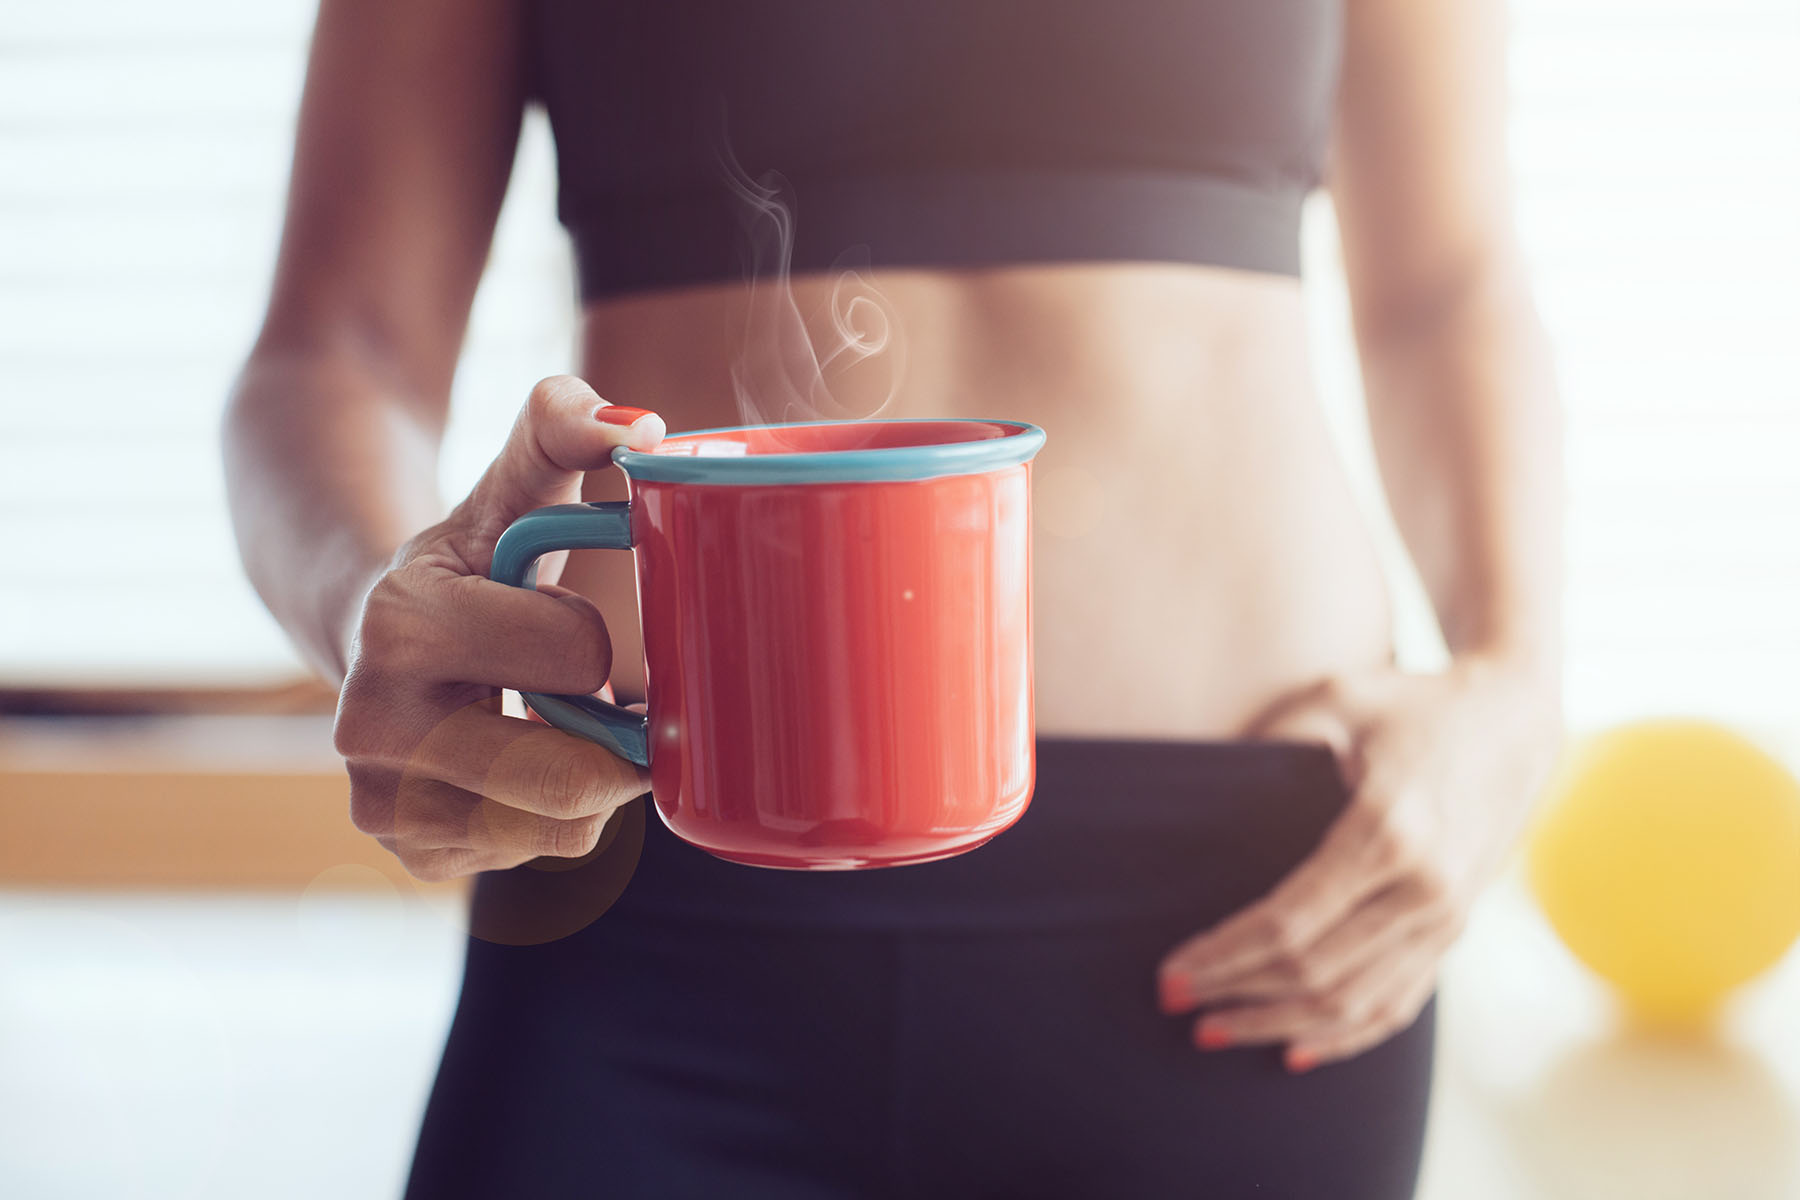 Female athlete holds a steaming cup of coffee in a red mug.